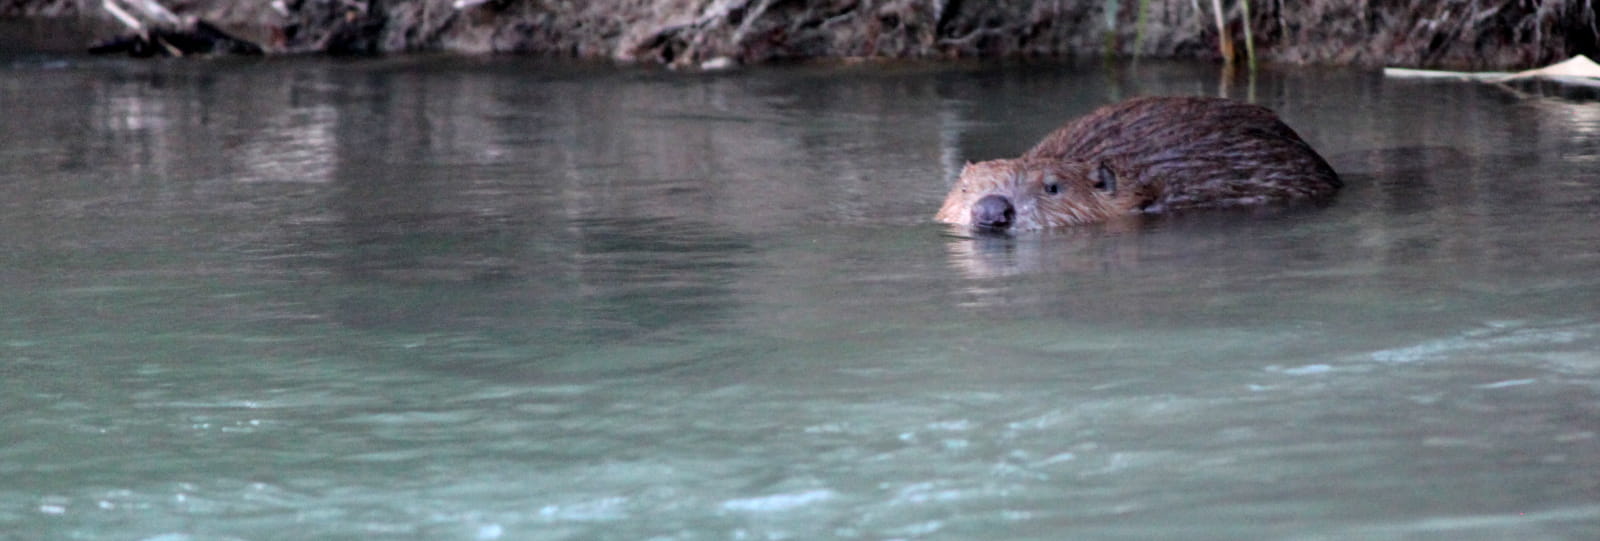 Guided Walk with Christophe Pelet: Meet the Beaver : Get Ready to Wet your Feet at Dusk to Learn More About this Clever Rodent